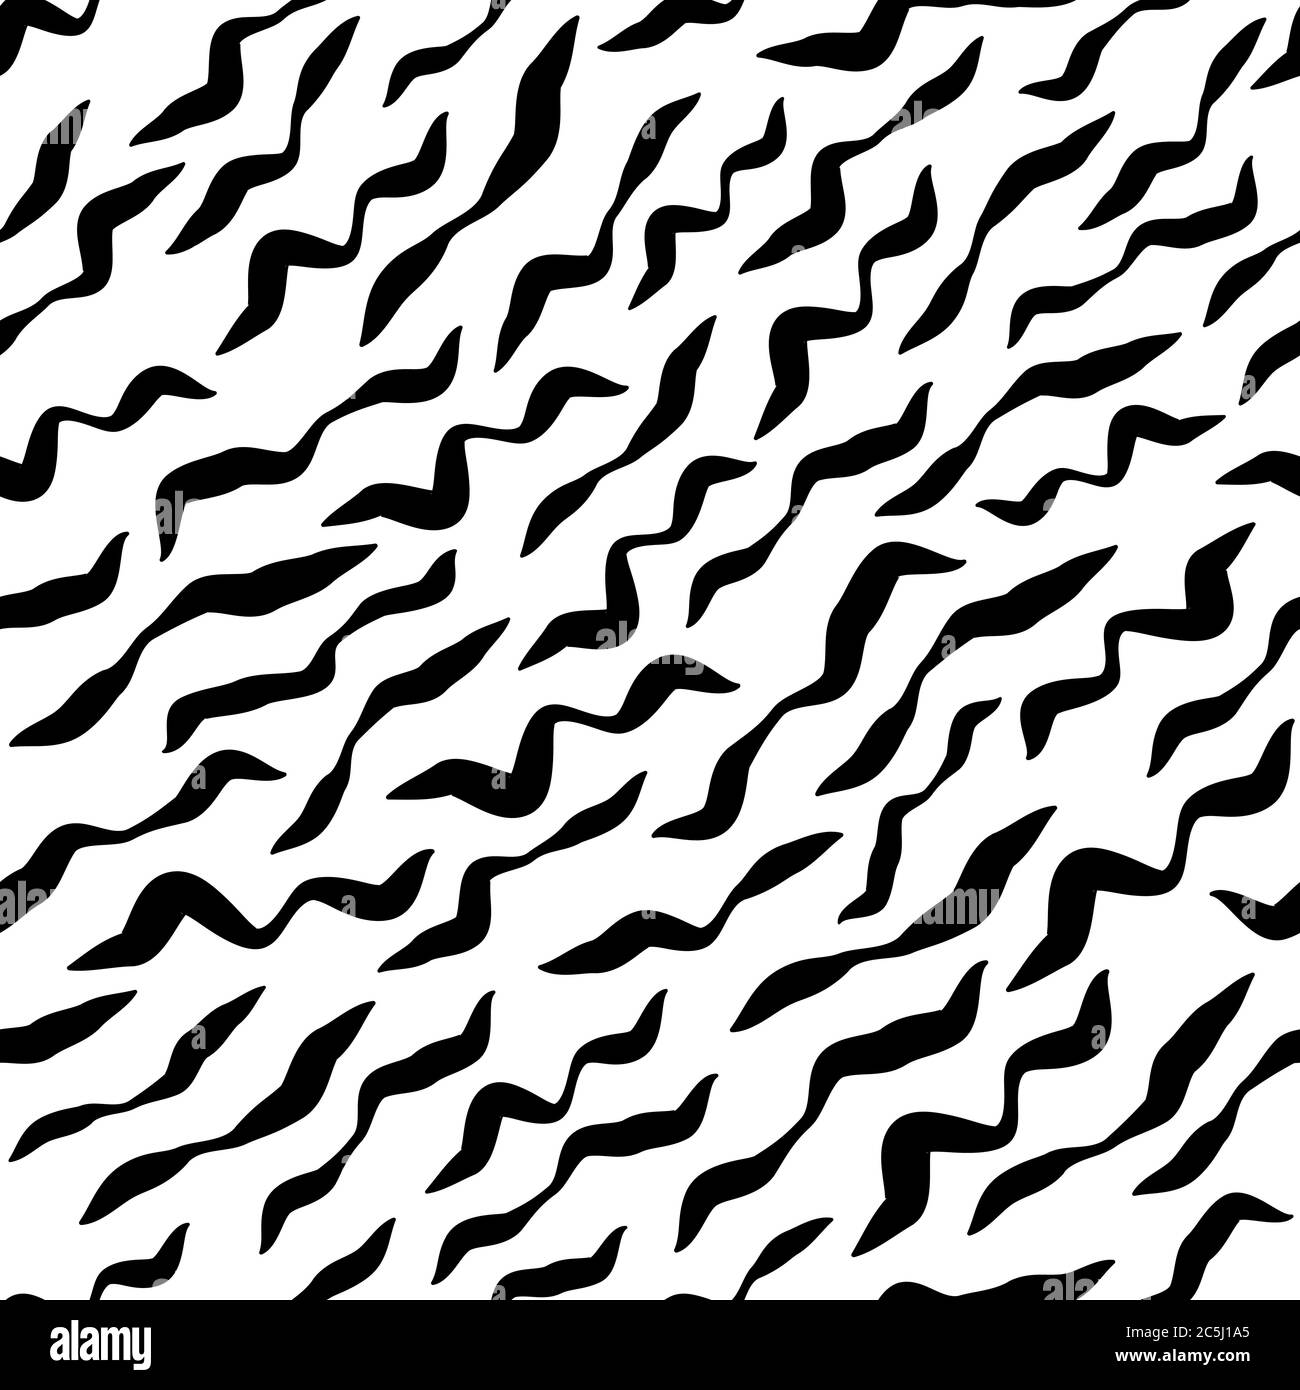 Seamless geometric pattern with wavy lines. Decorative abstract background Stock Vector